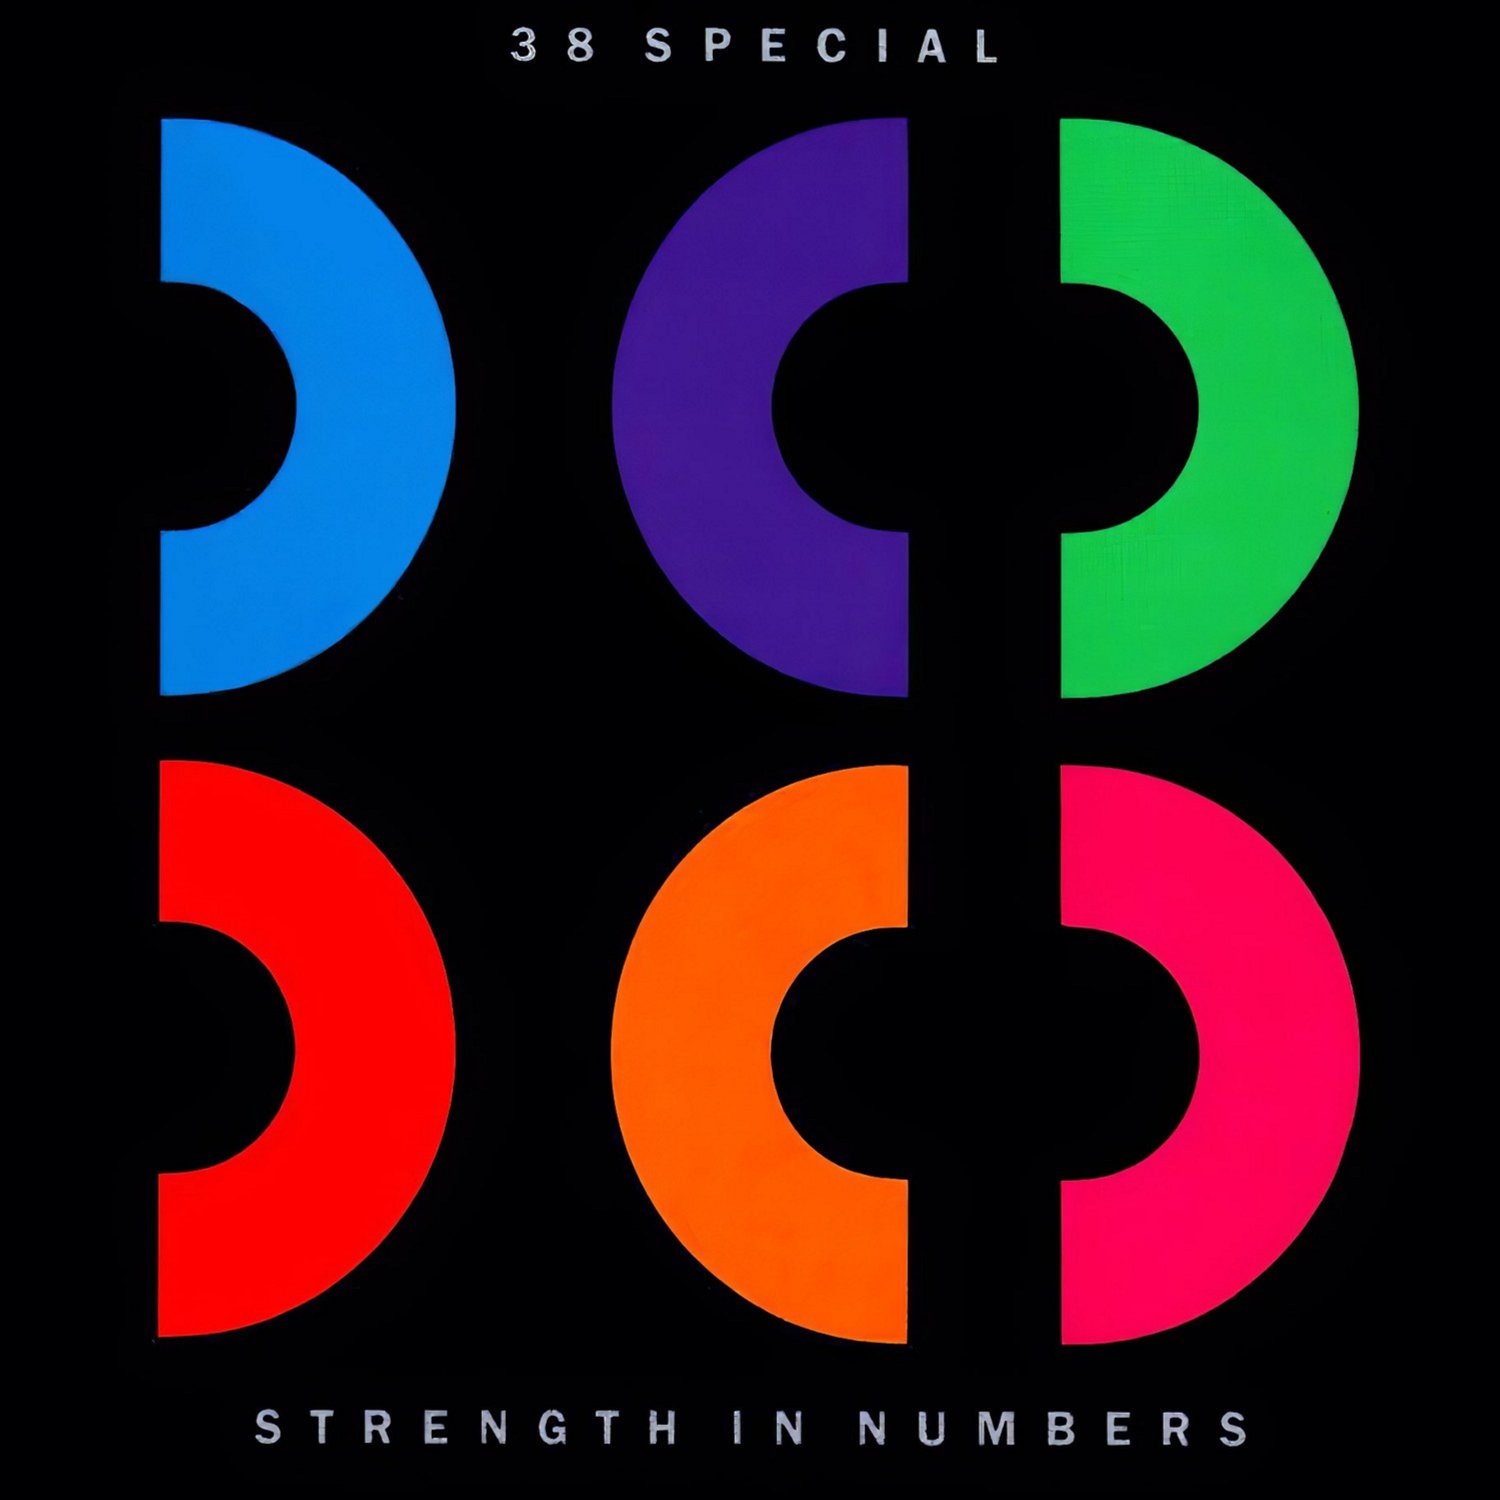 38 SPECIAL Strength in Numbers BANNER Huge 4X4 Ft Fabric Poster Tapestry Flag Print album cover art